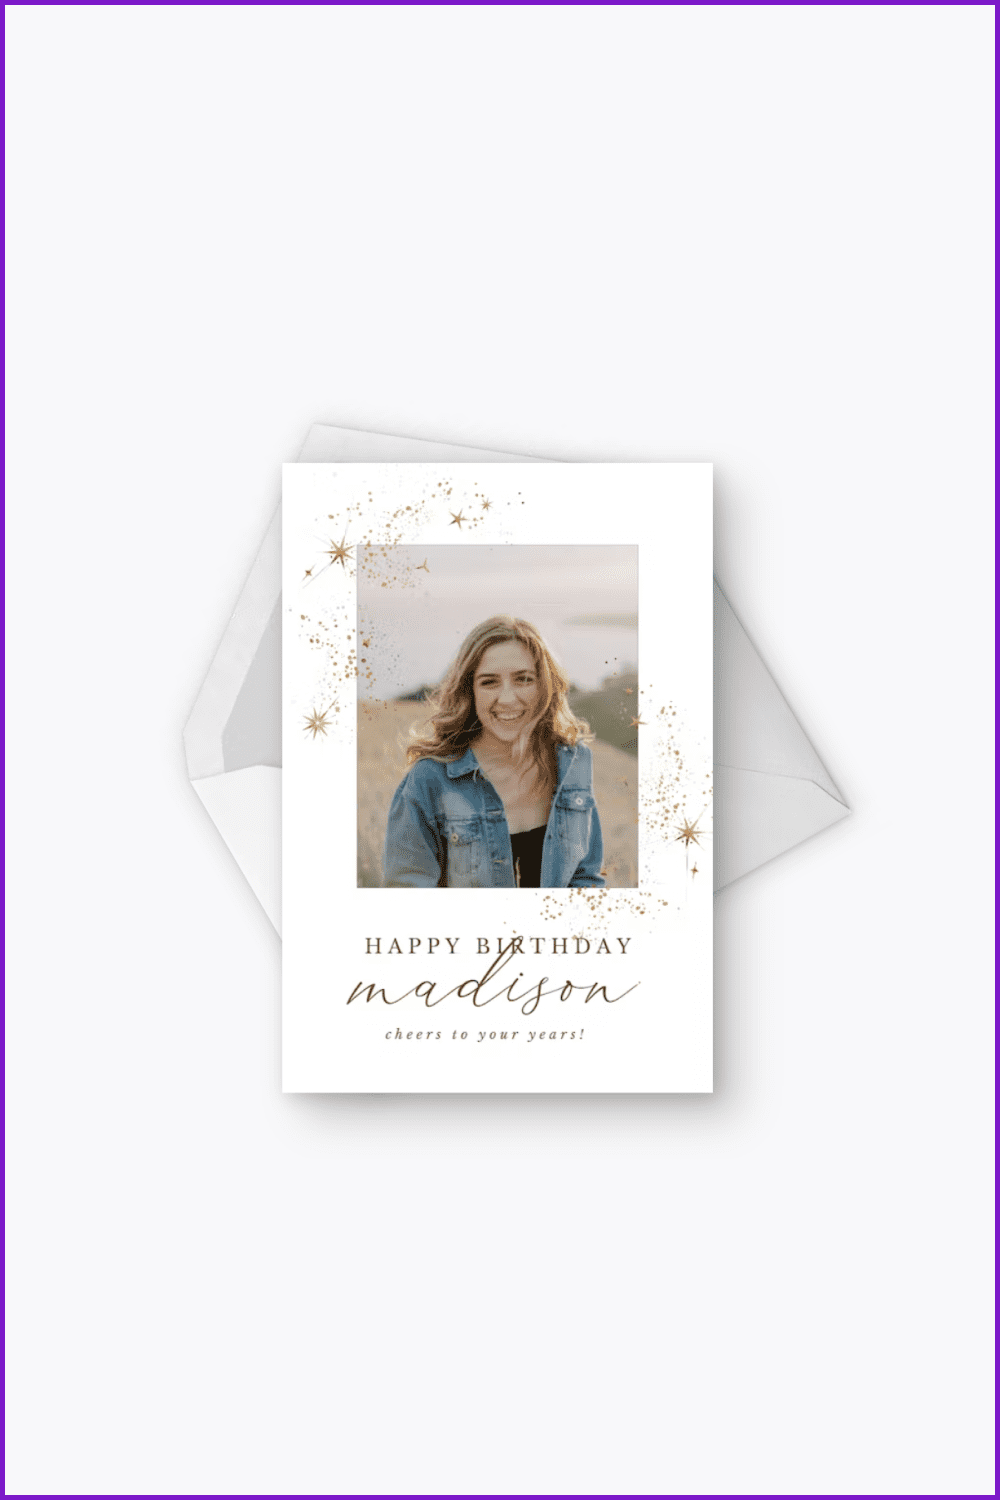 A neat birthday card with a photo of a girl and a short text.